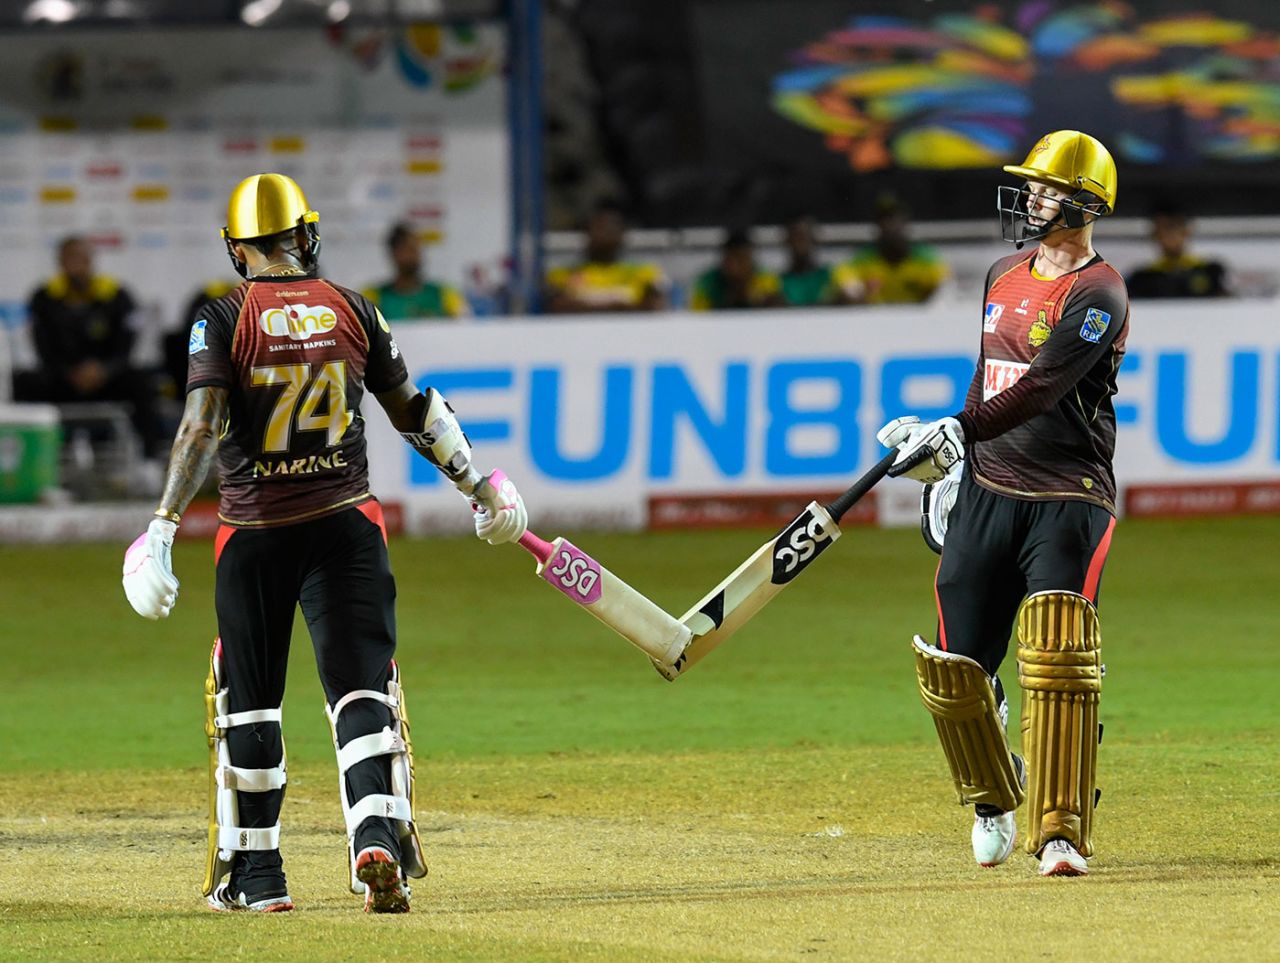 Sunil Narine and Colin Munro did most of the work for the Knight Riders, Trinbago Knight Riders v Jamaica Tallawahs, CPL 2020, Trinidad, August 20, 2020